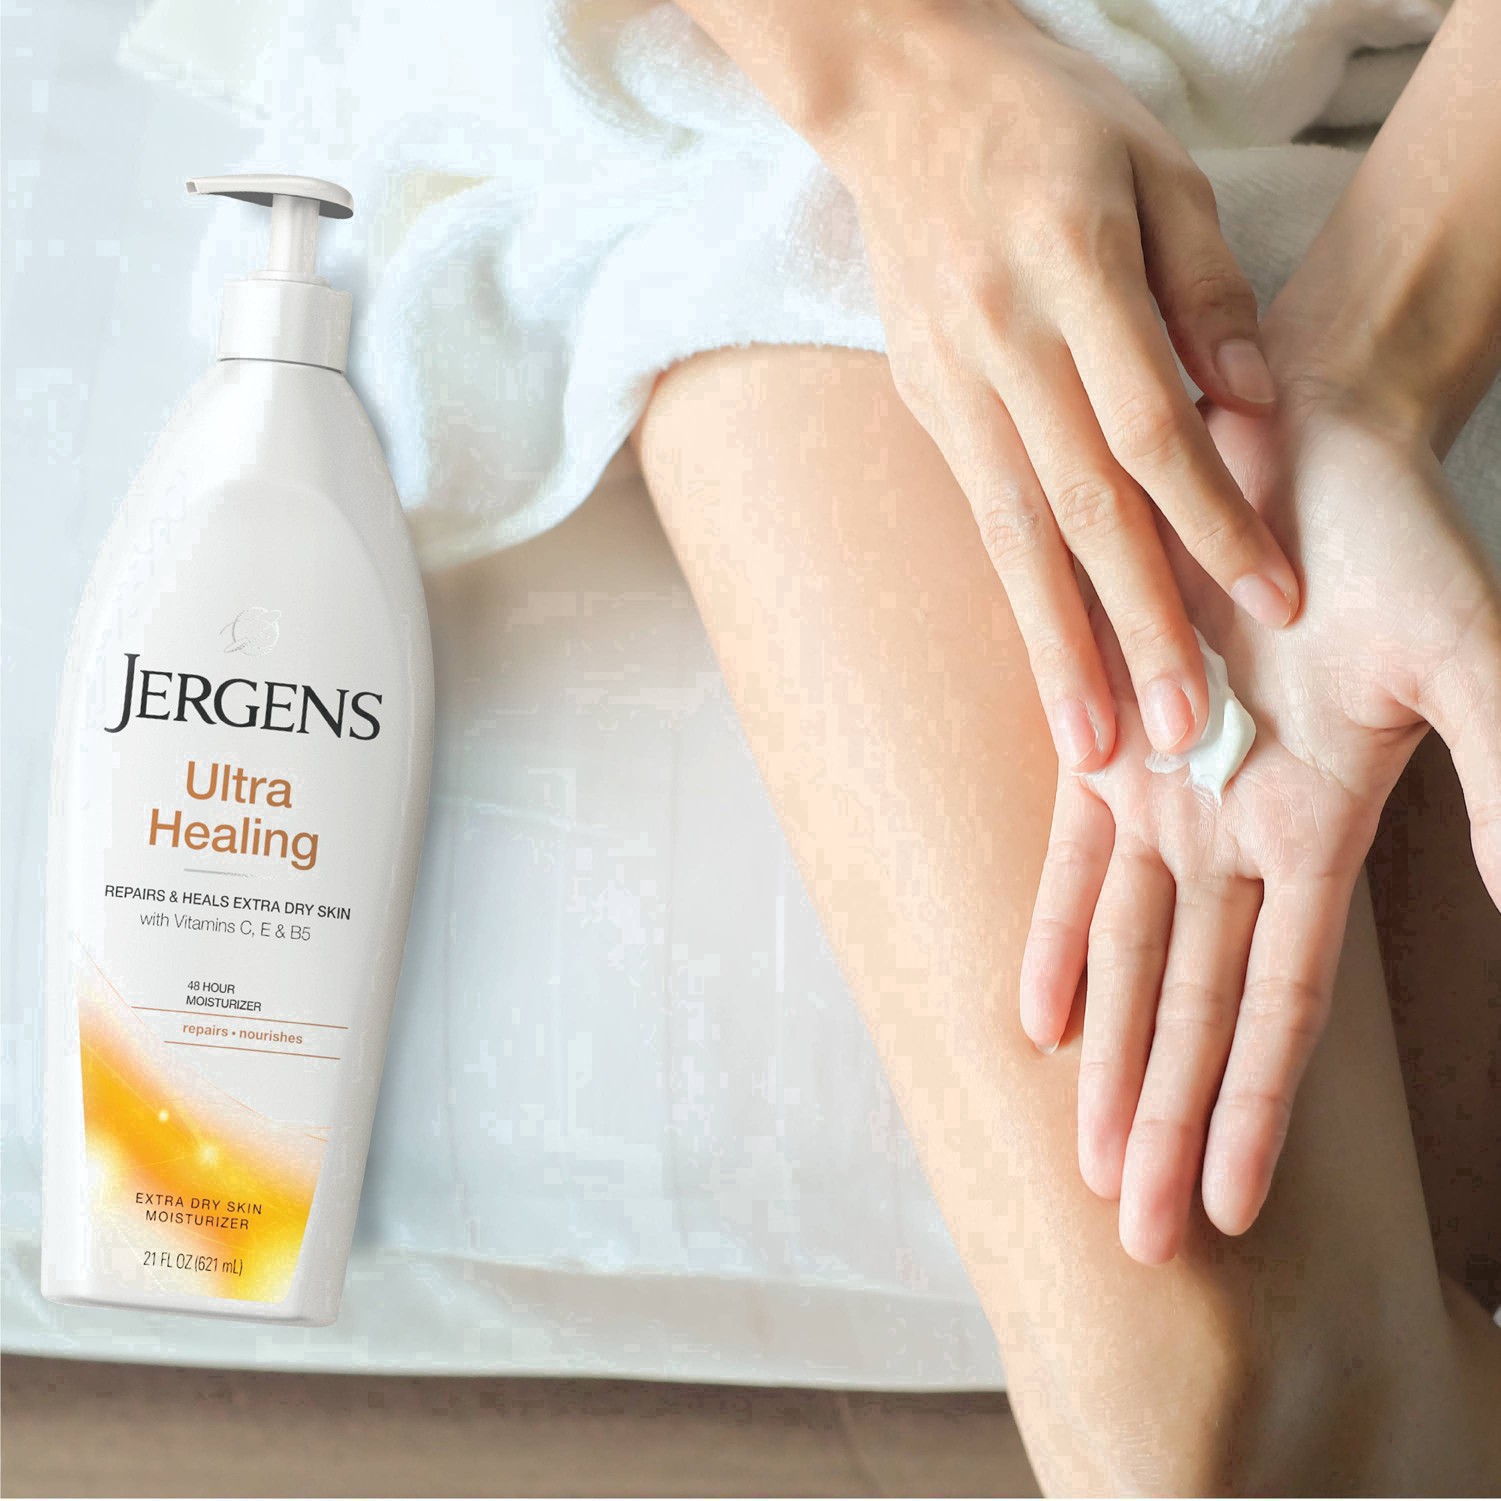 slide 22 of 67, Jergens Hand and Body Lotion, Dry Skin Moisturizer with Vitamins C,E, and B5, 21 fl oz